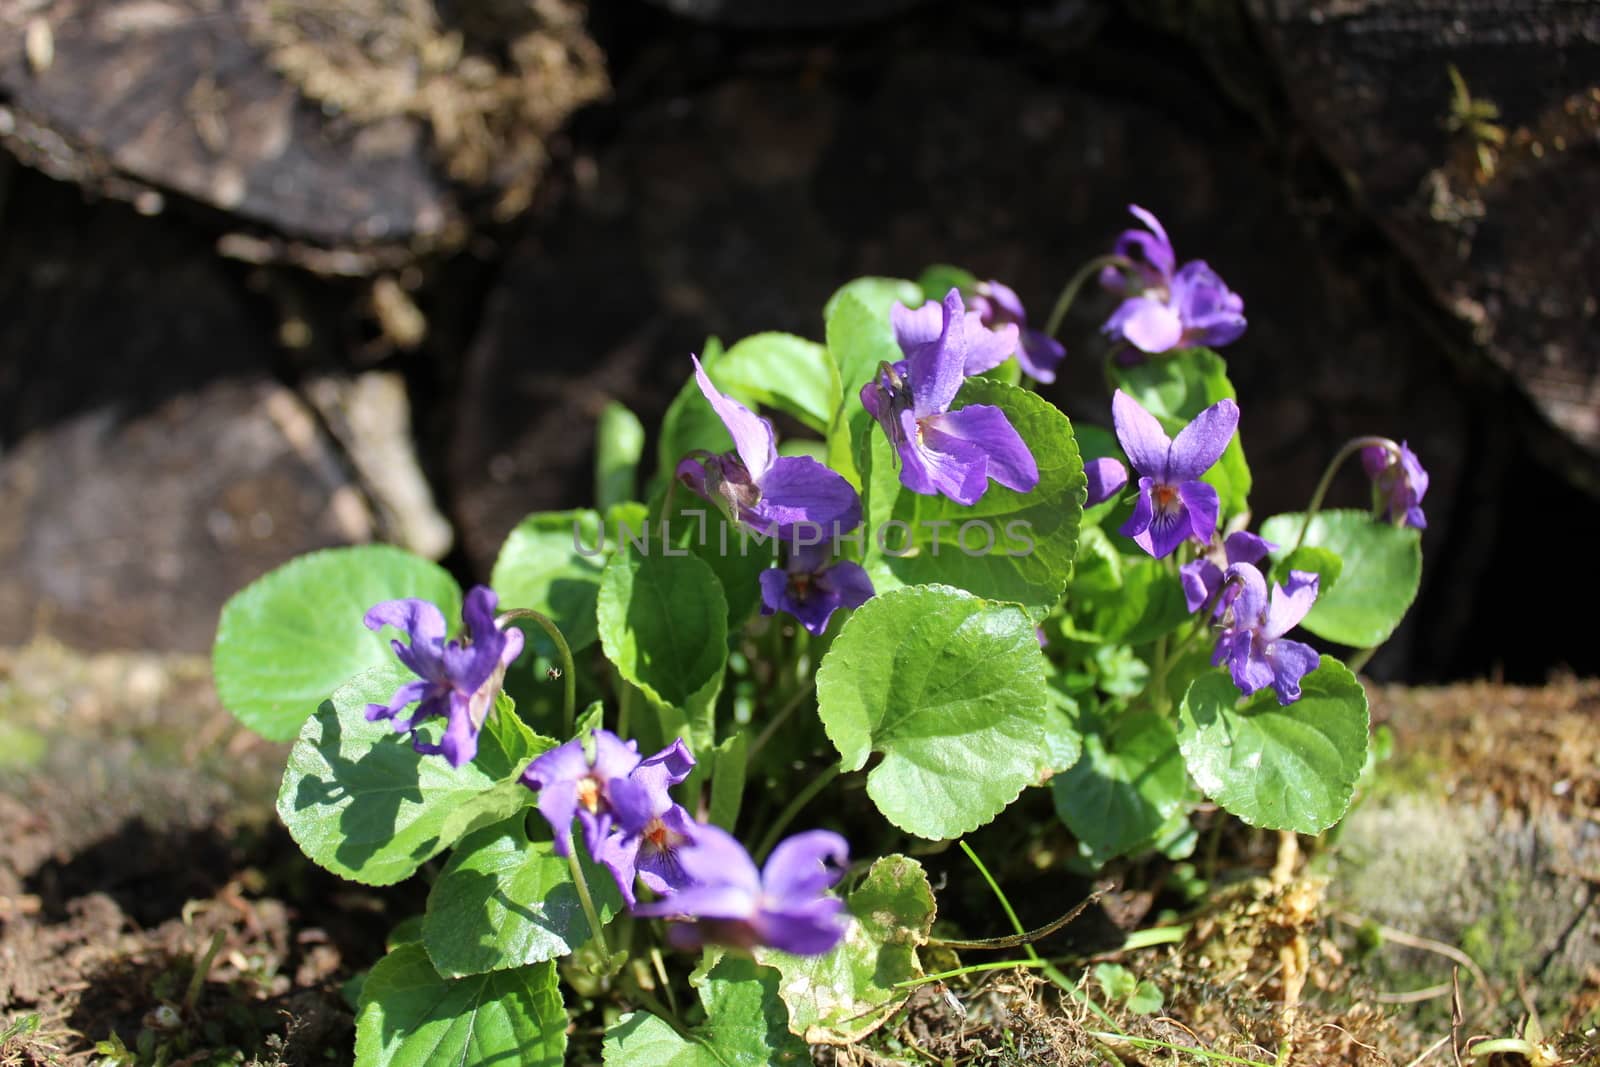 The picture shows violets in the garden.